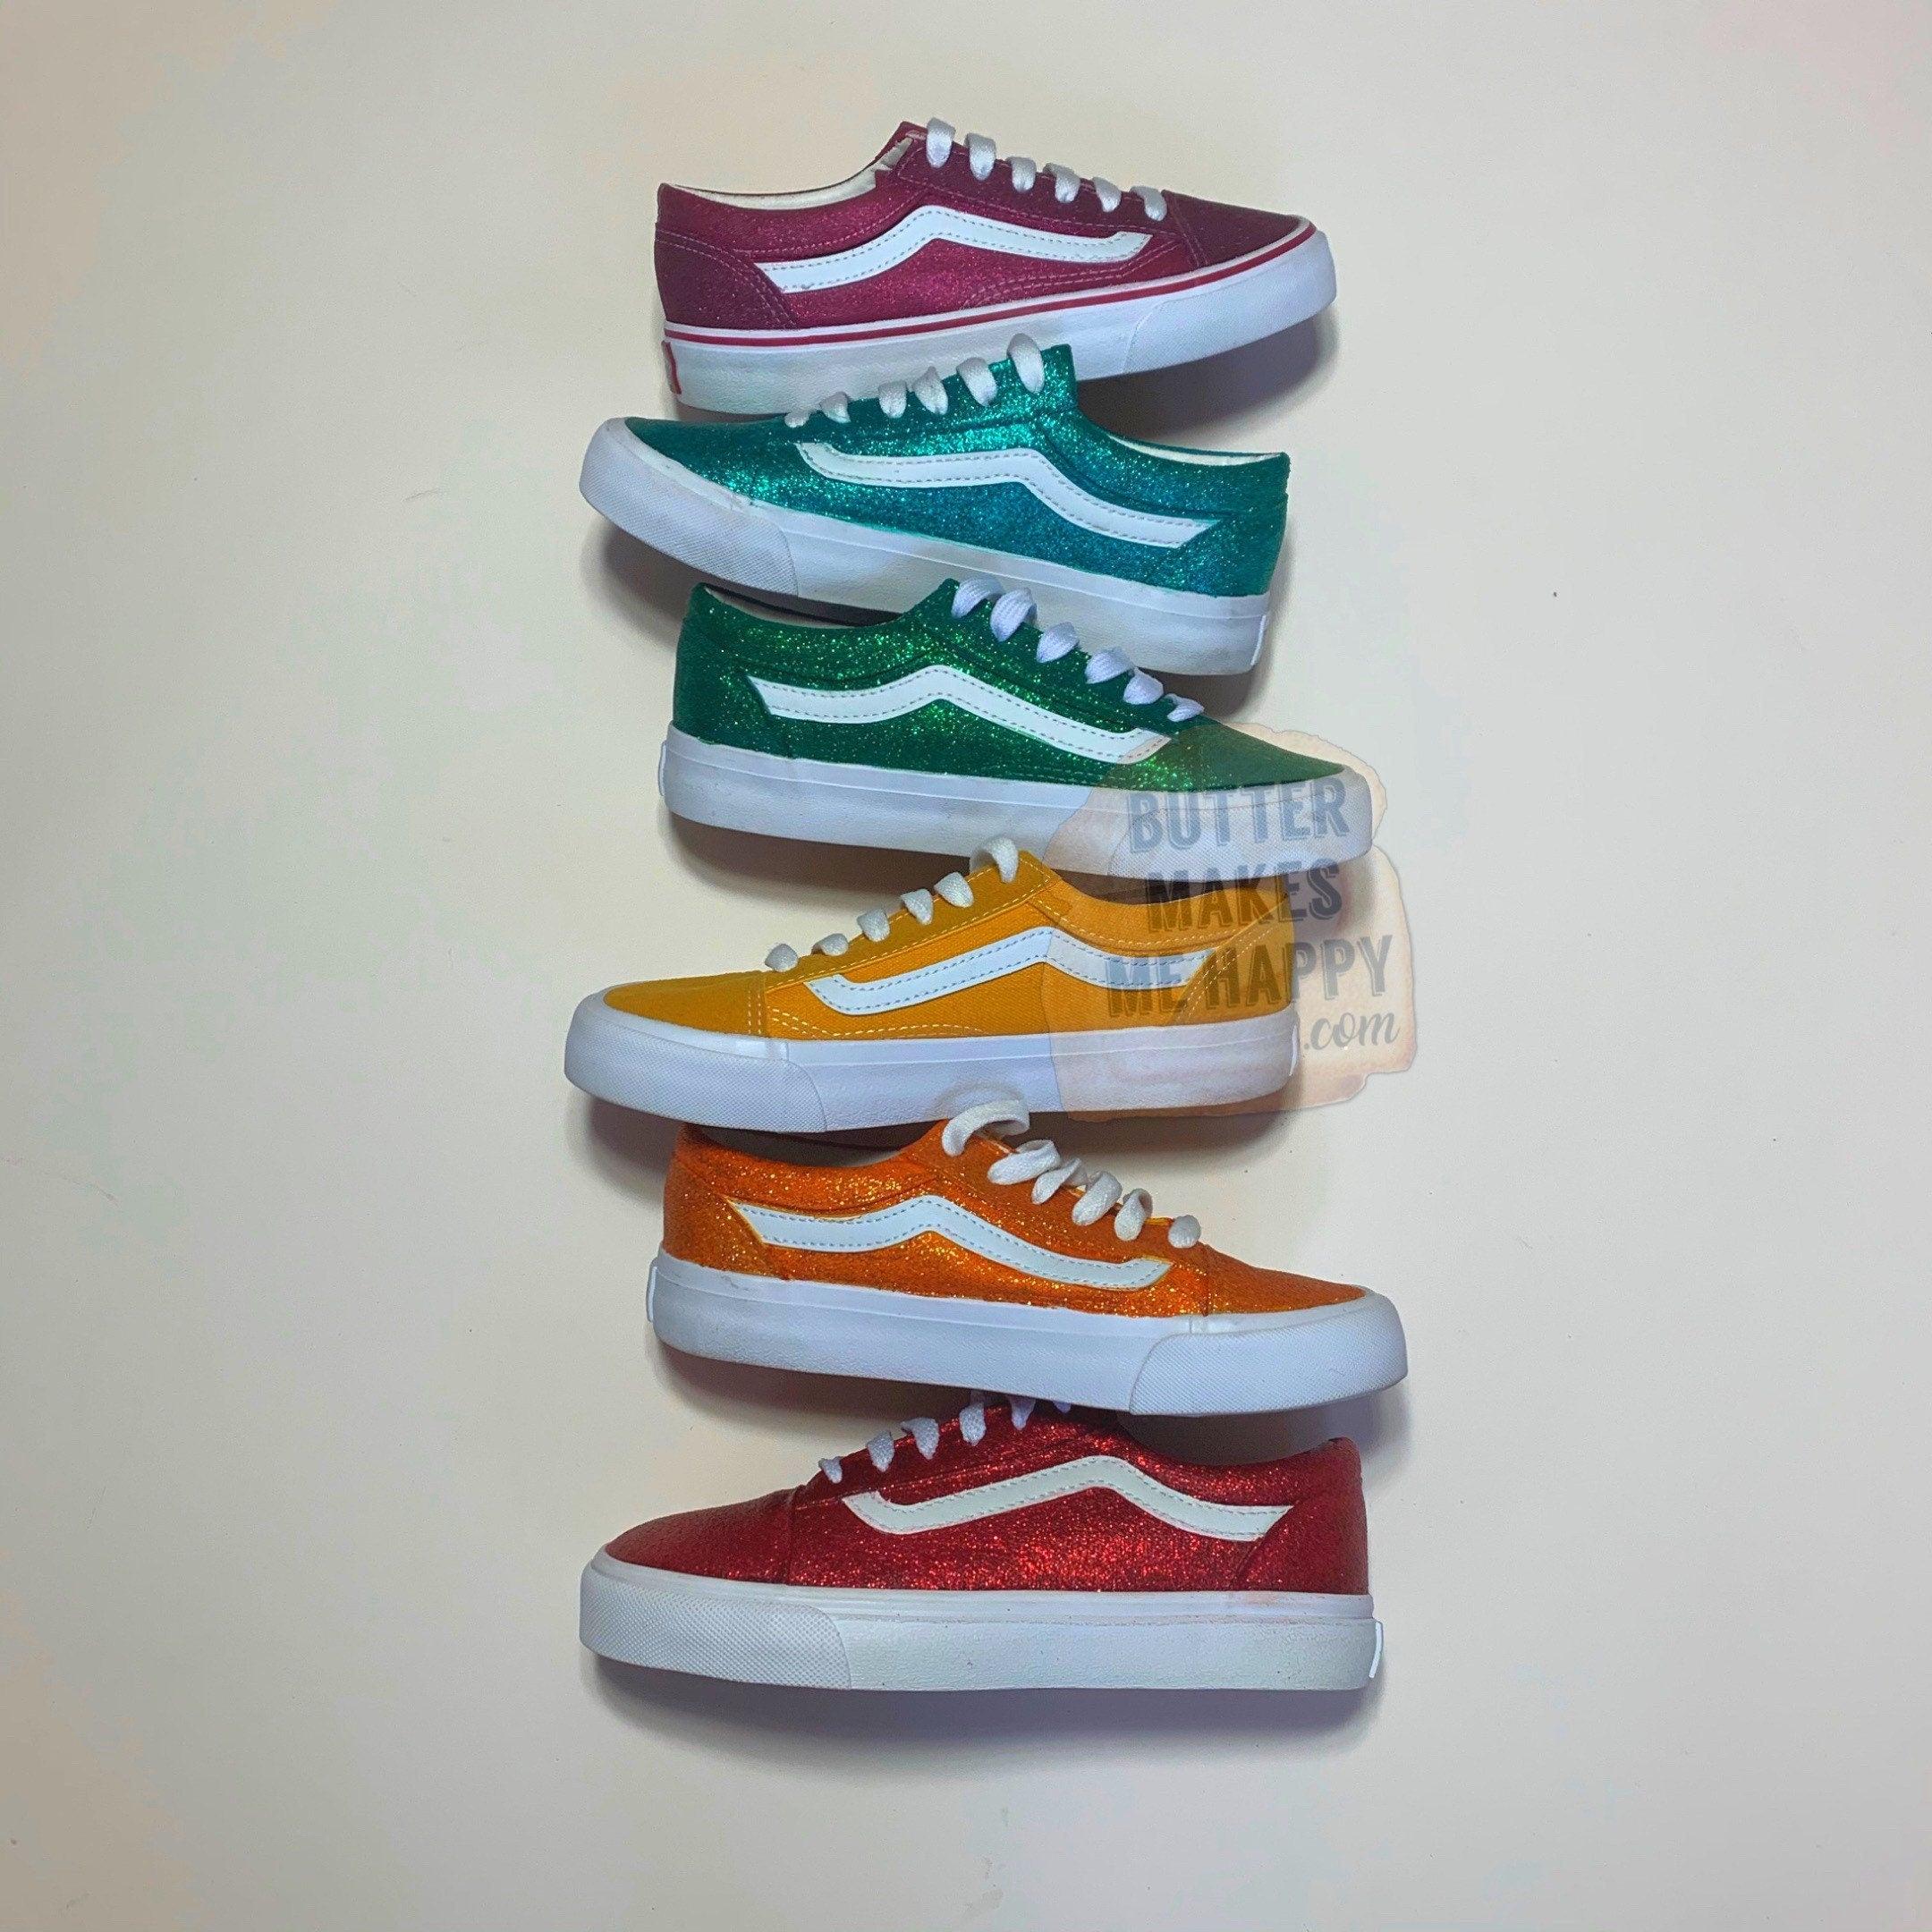 Pick Your Color - Skool Vans – Glitter Old ButterMakesMeHappy Sparkly